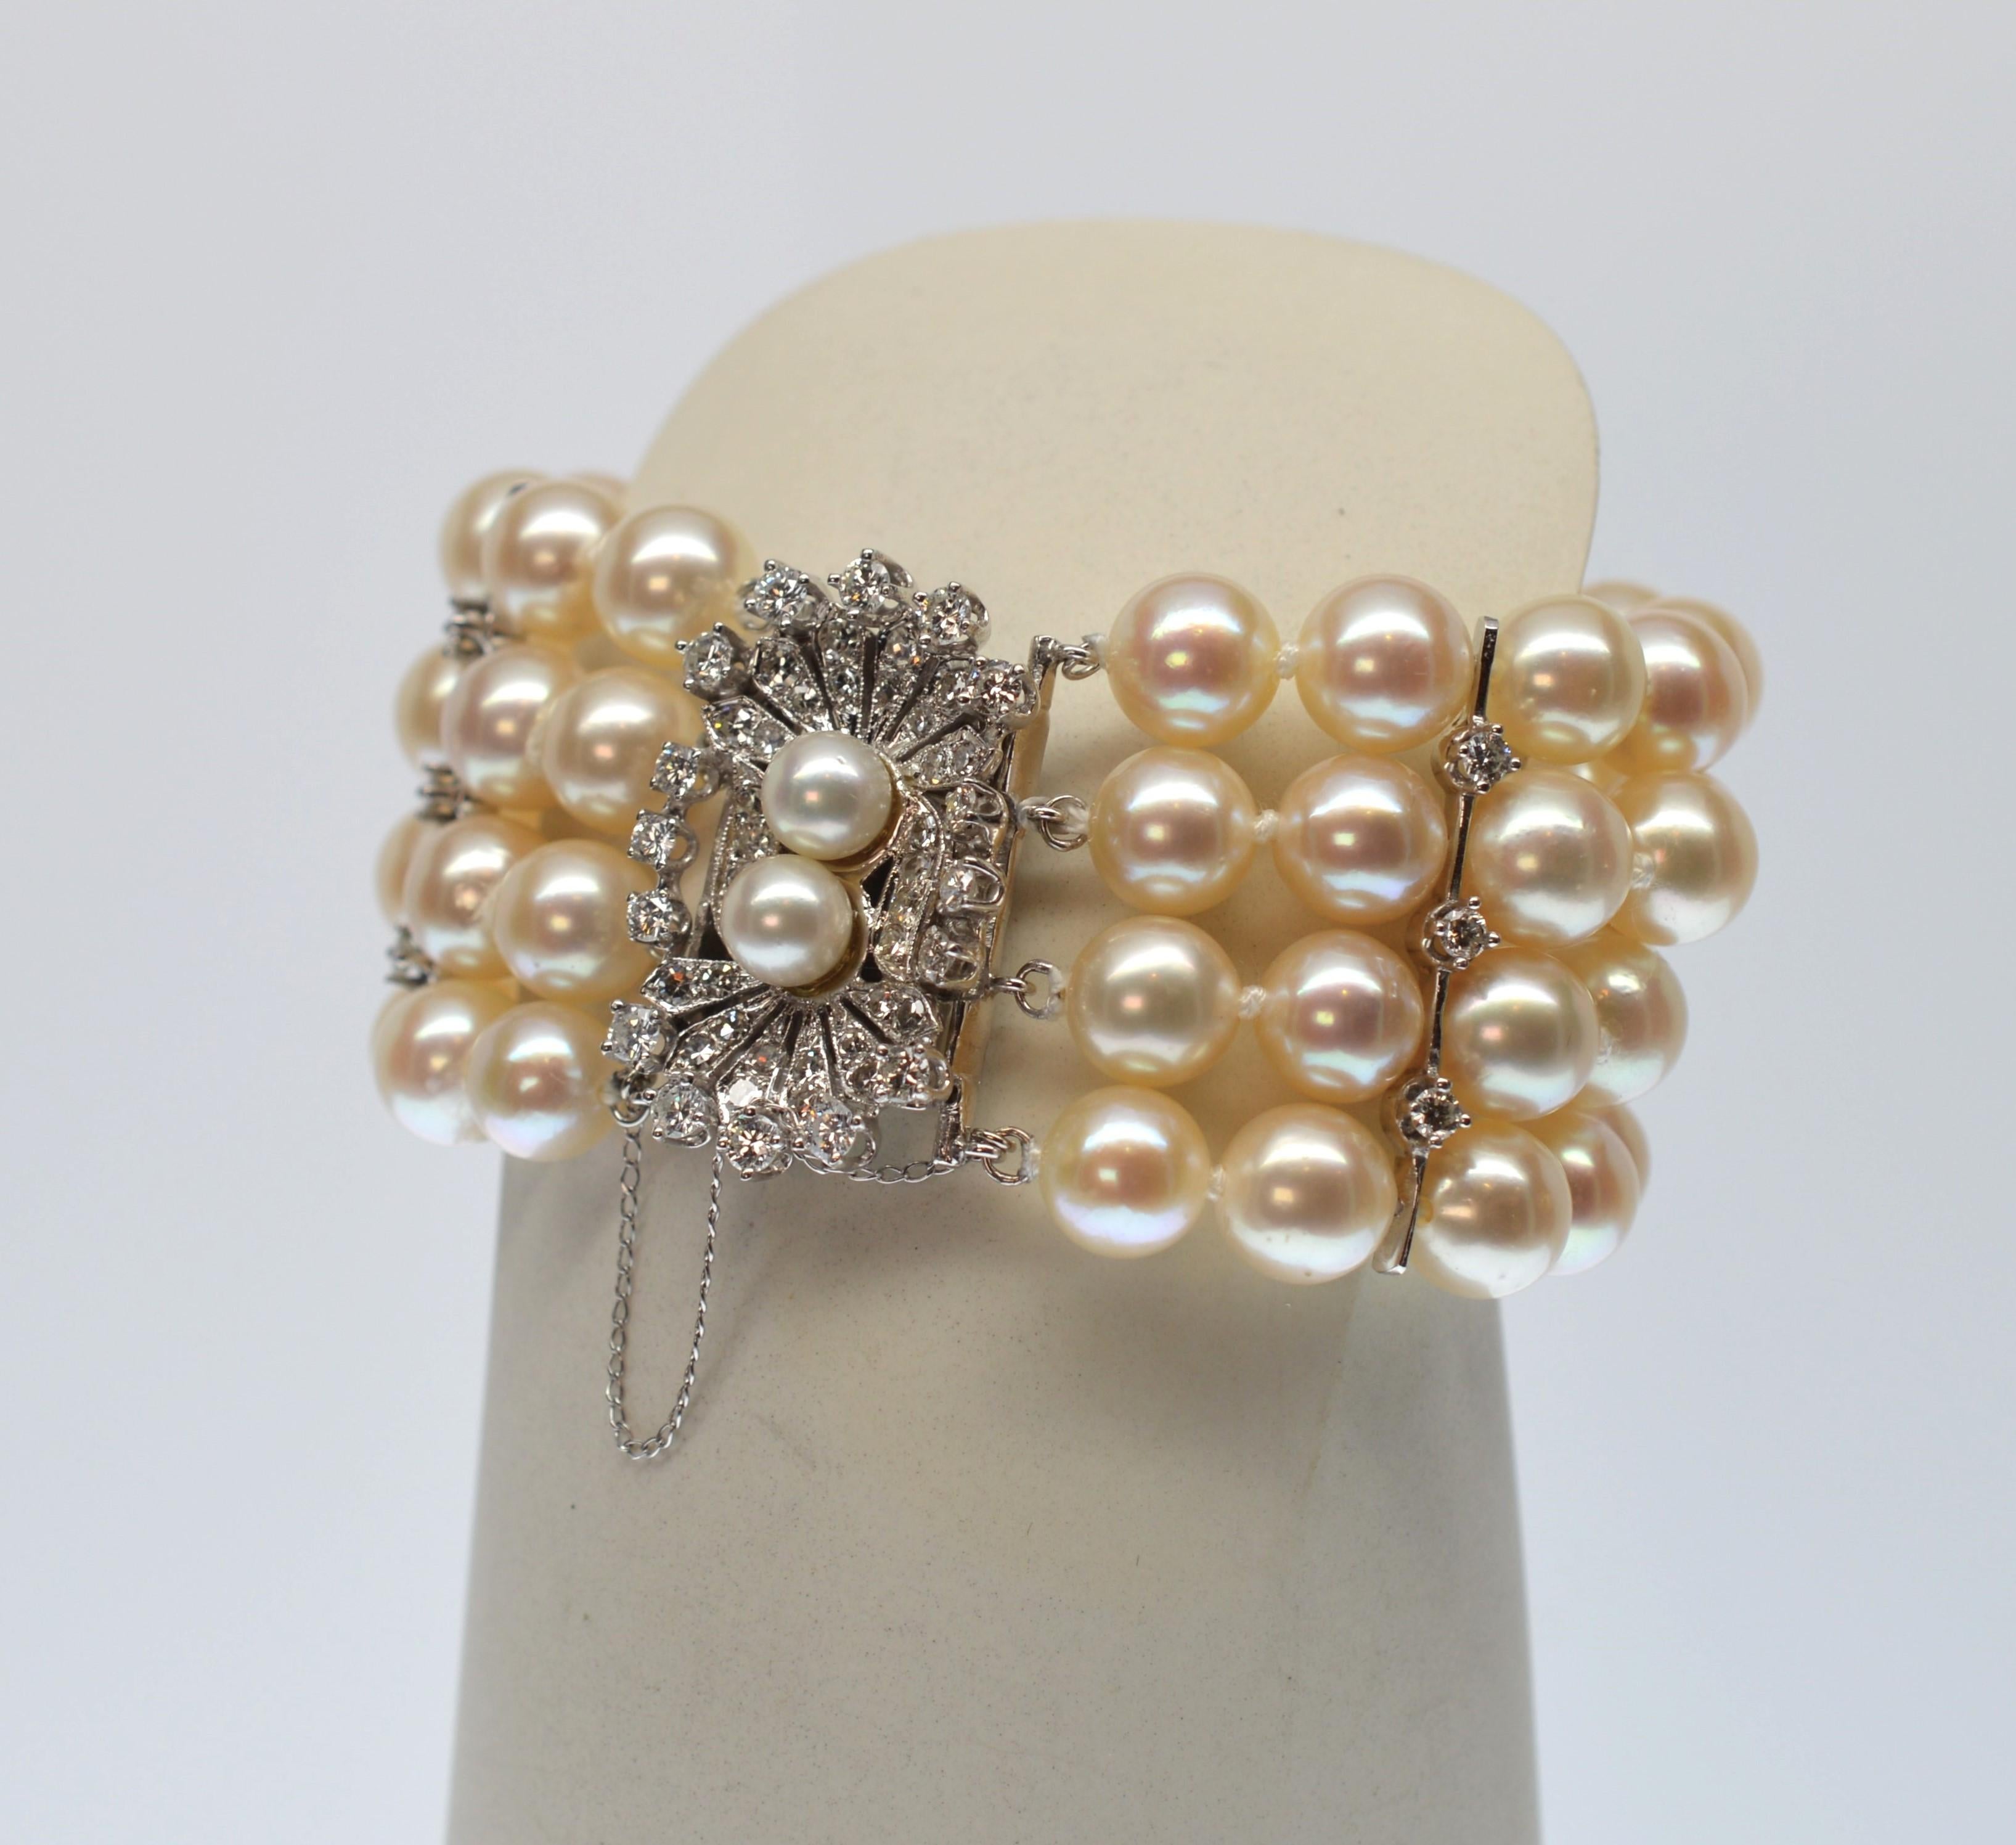 Find vintage glory in this outstanding mid-century jeweled Art-Deco style pearl bracelet. Exquisite, featuring a sparkling diamond covered white gold ornamental clasp which brilliantly hosts four strands of lustrous matching hand-knotted AAA creamy